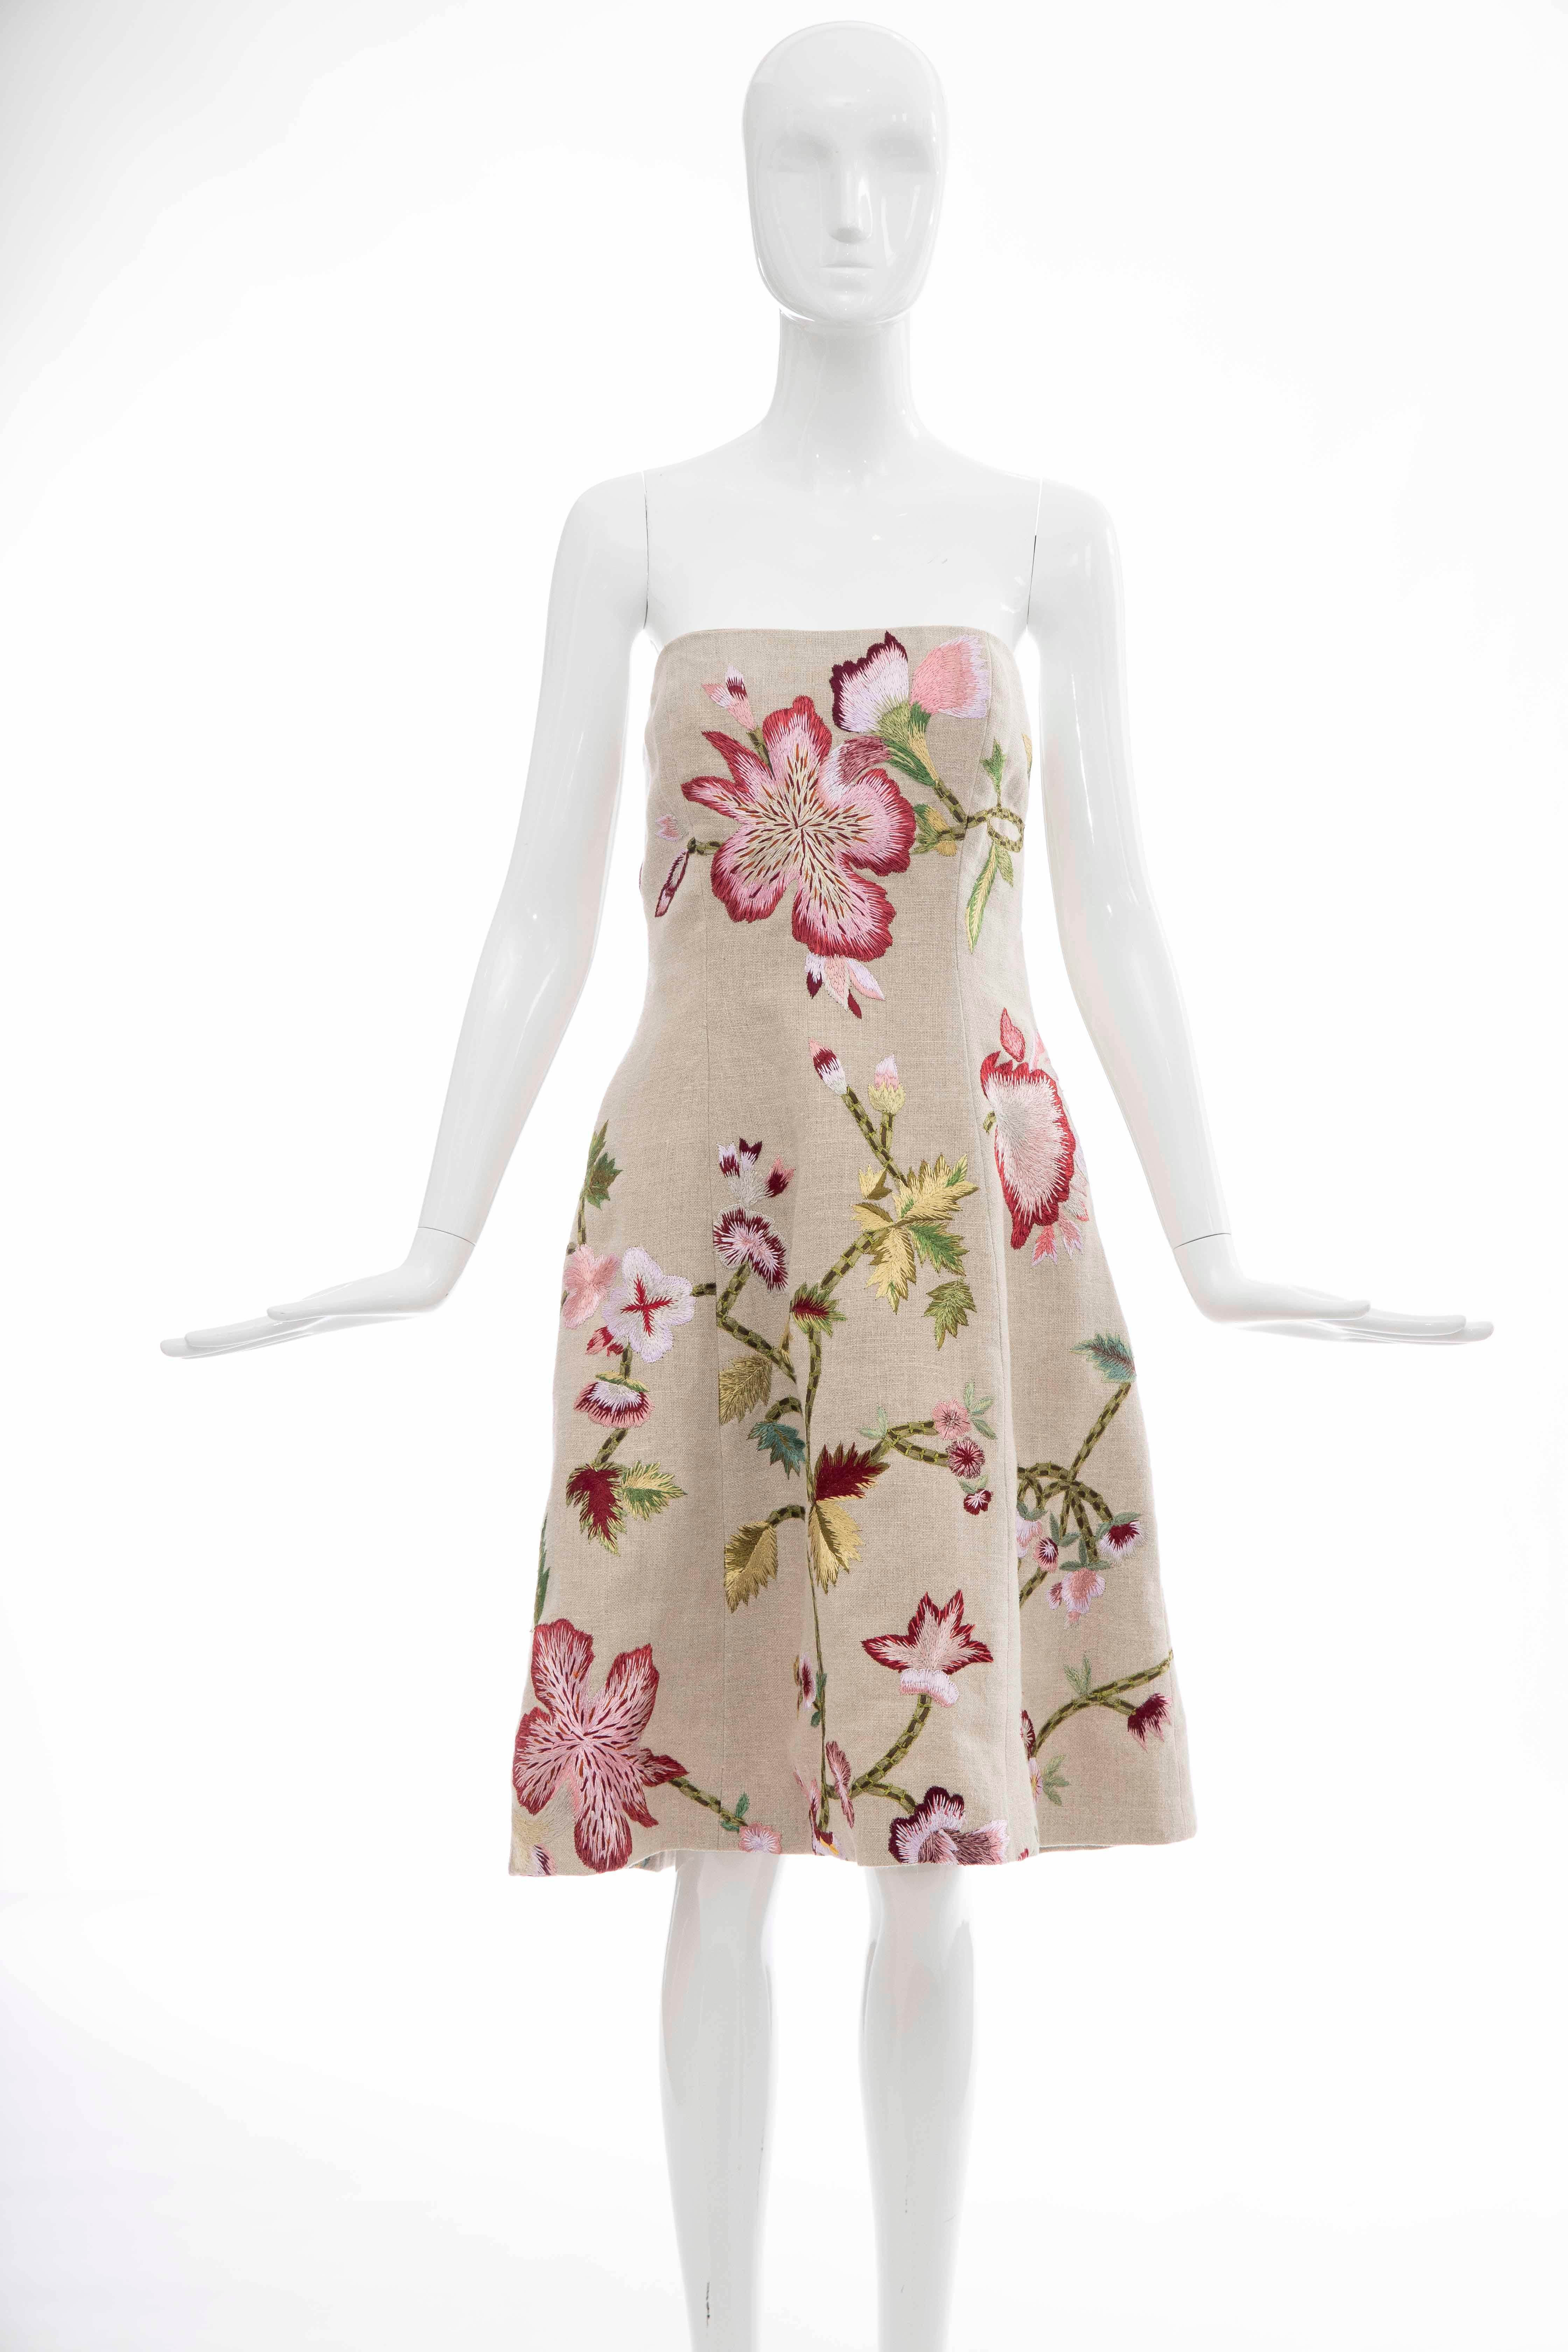 Oscar De la Renta, Runway Spring 2003 linen and floral embroidered strapless dress, built in brasiere, side zip and fully lined in silk.

US. 8

Bust: 32, Waist: 34, Hips: 46, Length: 33
